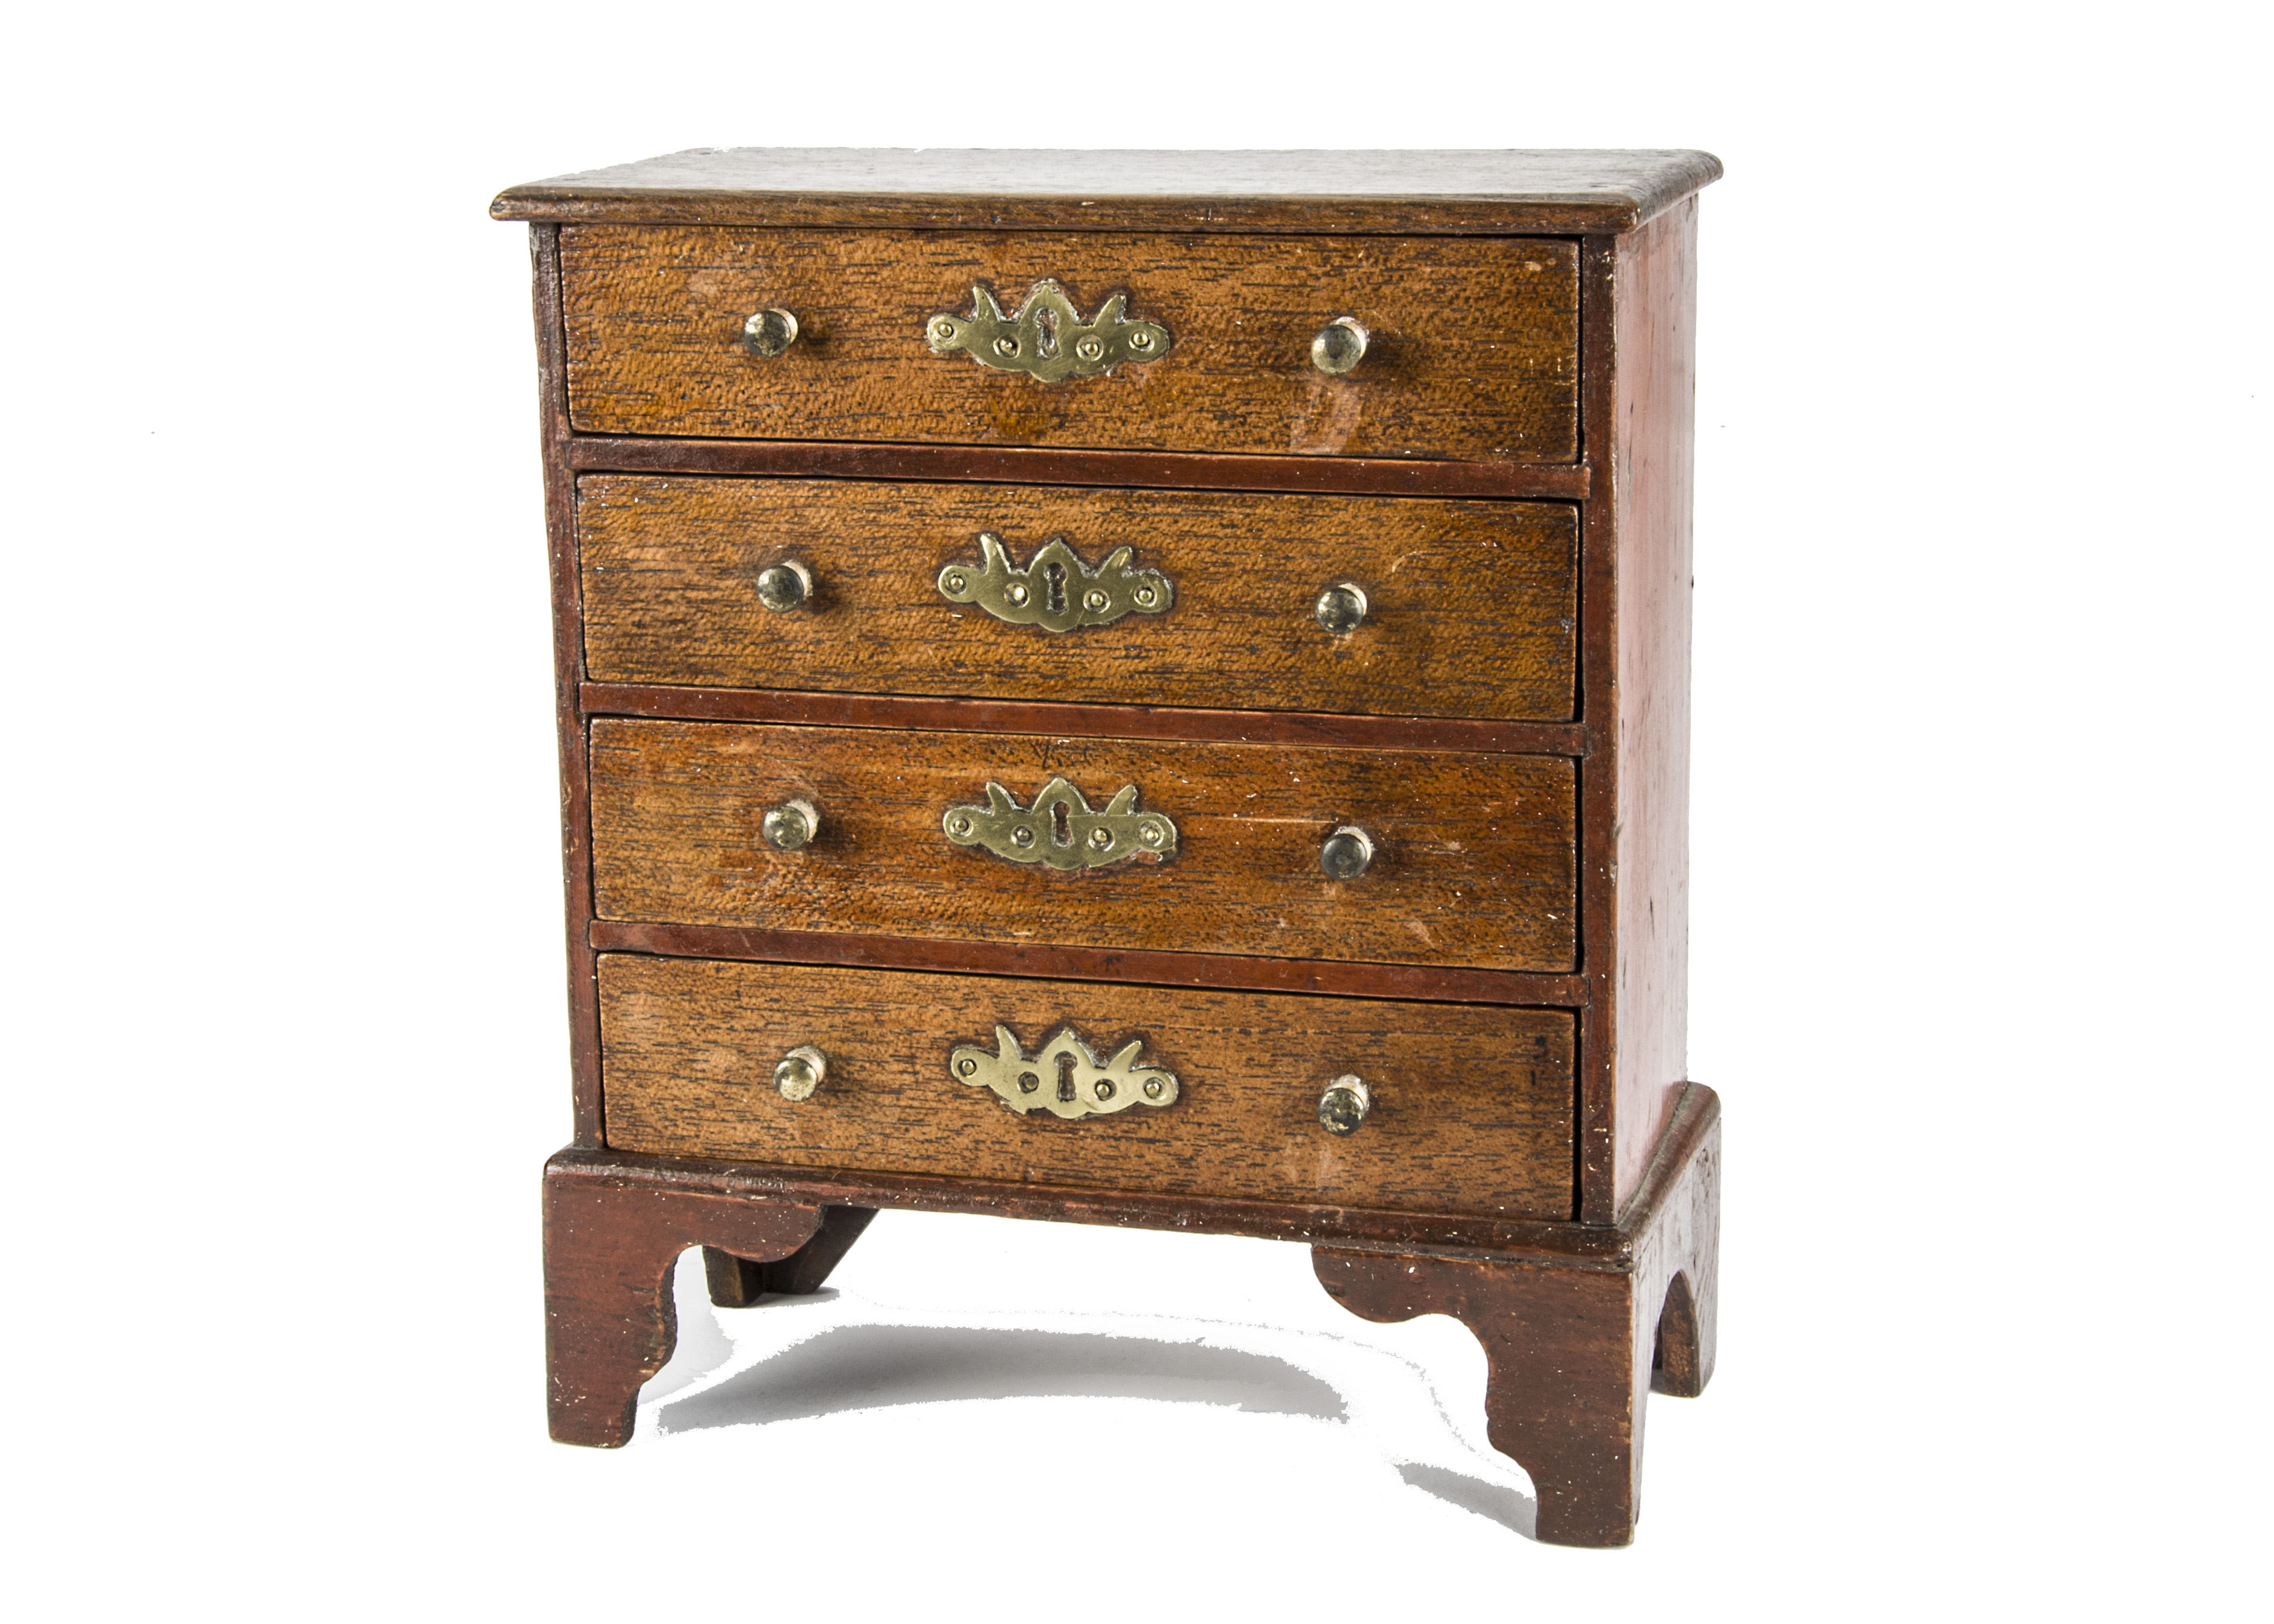 A rare Bubb doll’s chest of drawers 1820-30s, with four drawers, brass knobs and escutcheon